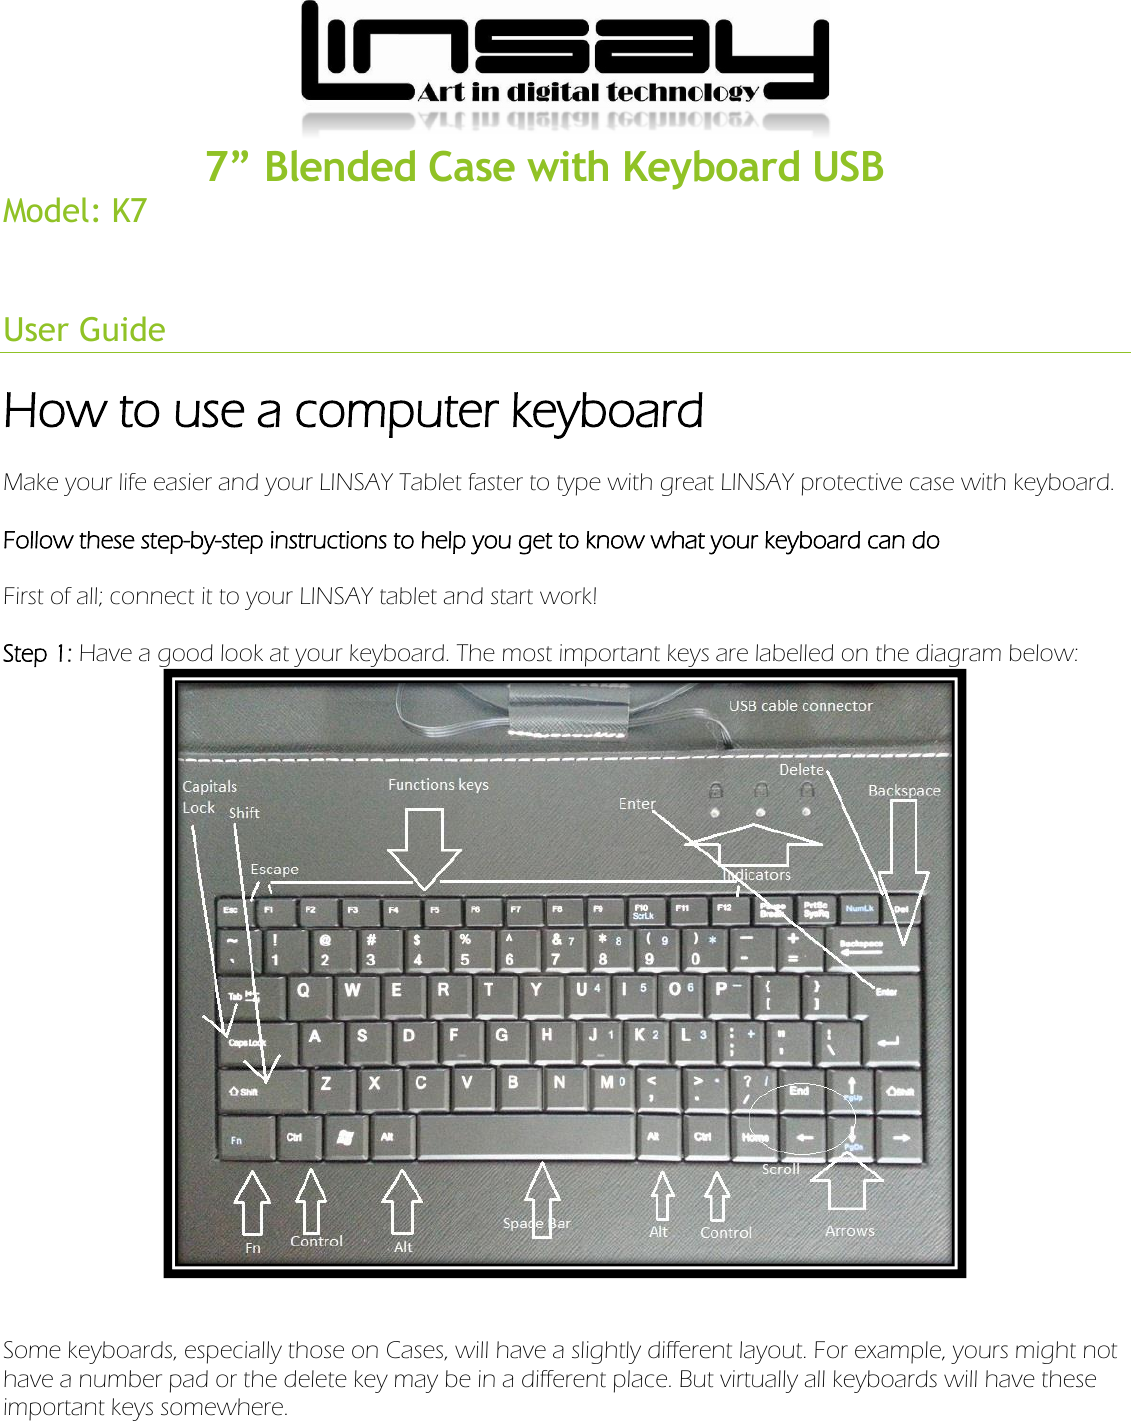                  7” Blended Case with Keyboard USB Model:  K7User Guide How to use a computer keyboard Make your life easier and your LINSAY Tablet faster to type with great LINSAY protective case with keyboard. Follow these step-by-step instructions to help you get to know what your keyboard can do   First of all; connect it to your LINSAY tablet and start work!   Step 1: Have a good look at your keyboard. The most important keys are labelled on the diagram below:      Some keyboards, especially those on Cases, will have a slightly different layout. For example, yours might not have a number pad or the delete key may be in a different place. But virtually all keyboards will have these important keys somewhere.   